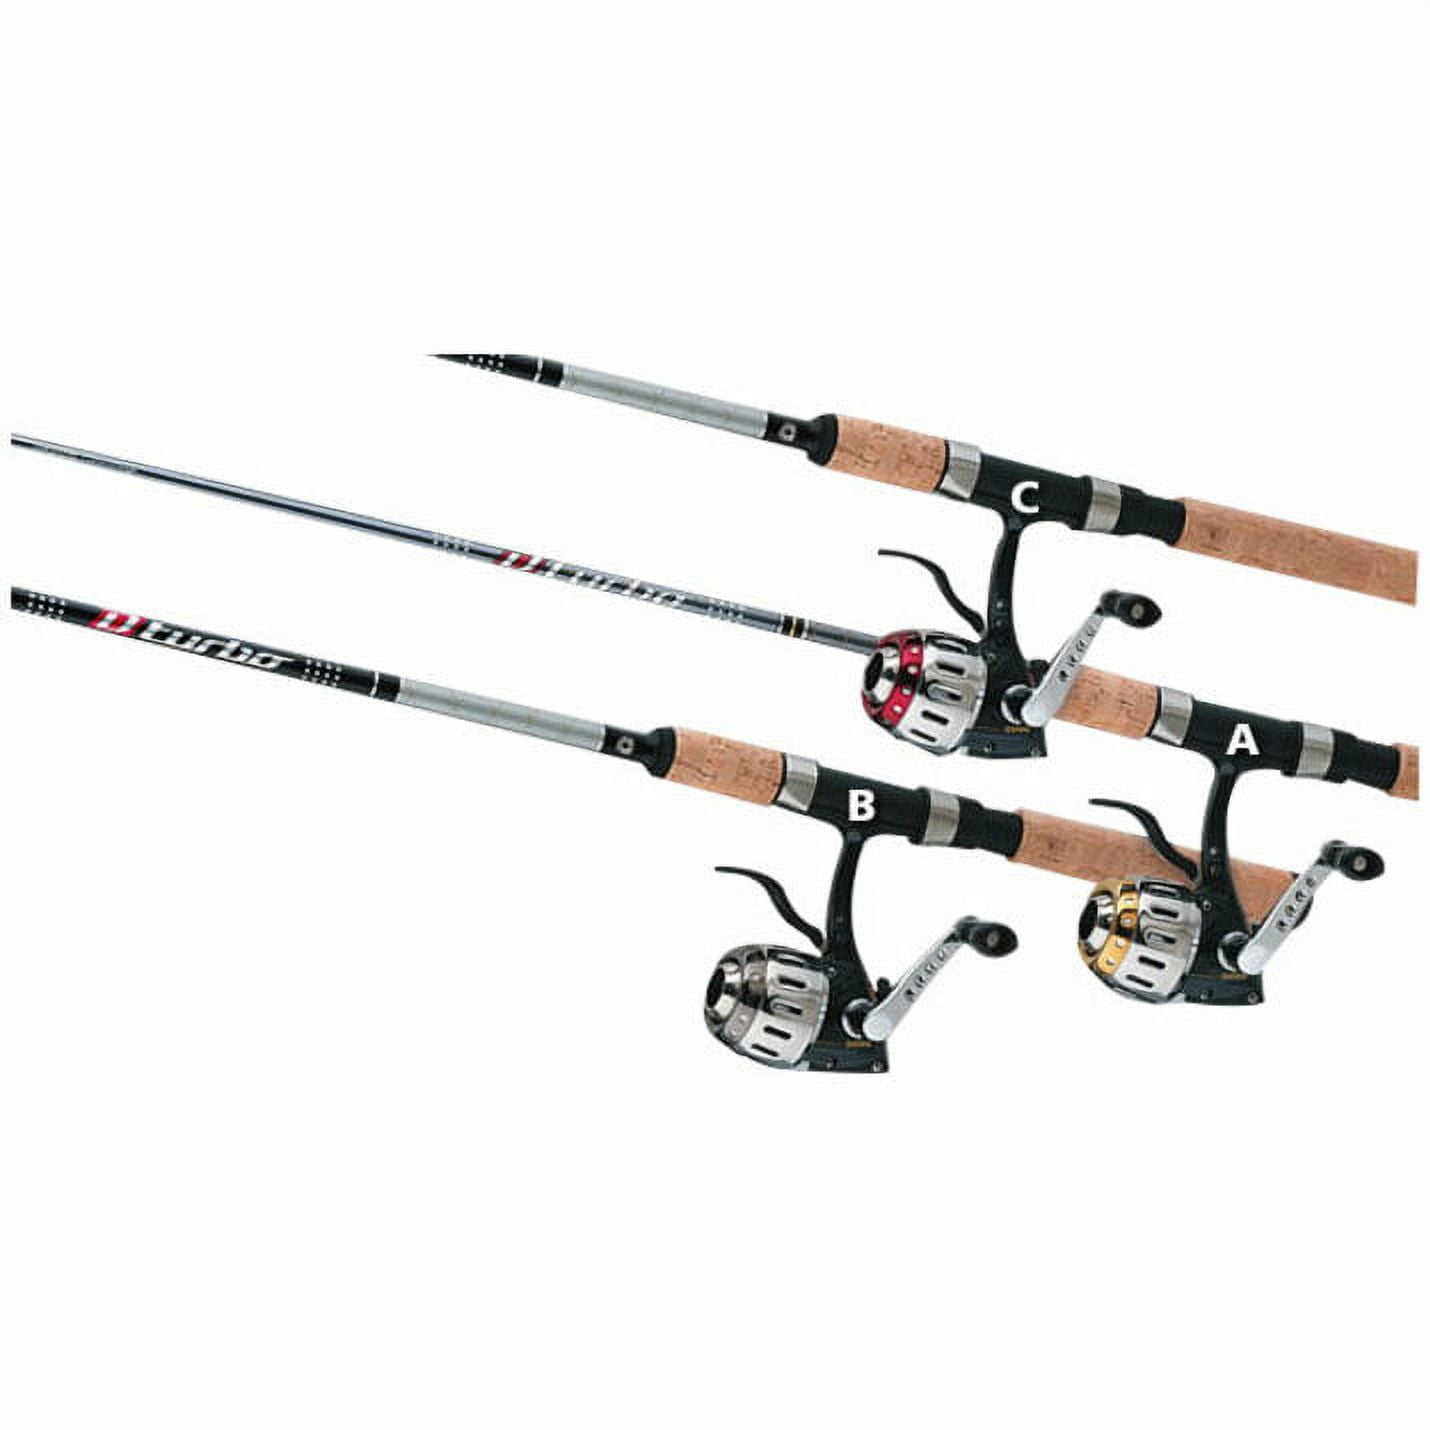 Lew's Xfinity Spinning Reel and Fishing Rod Combo, 6-Foot 6-Inch Rod, Green